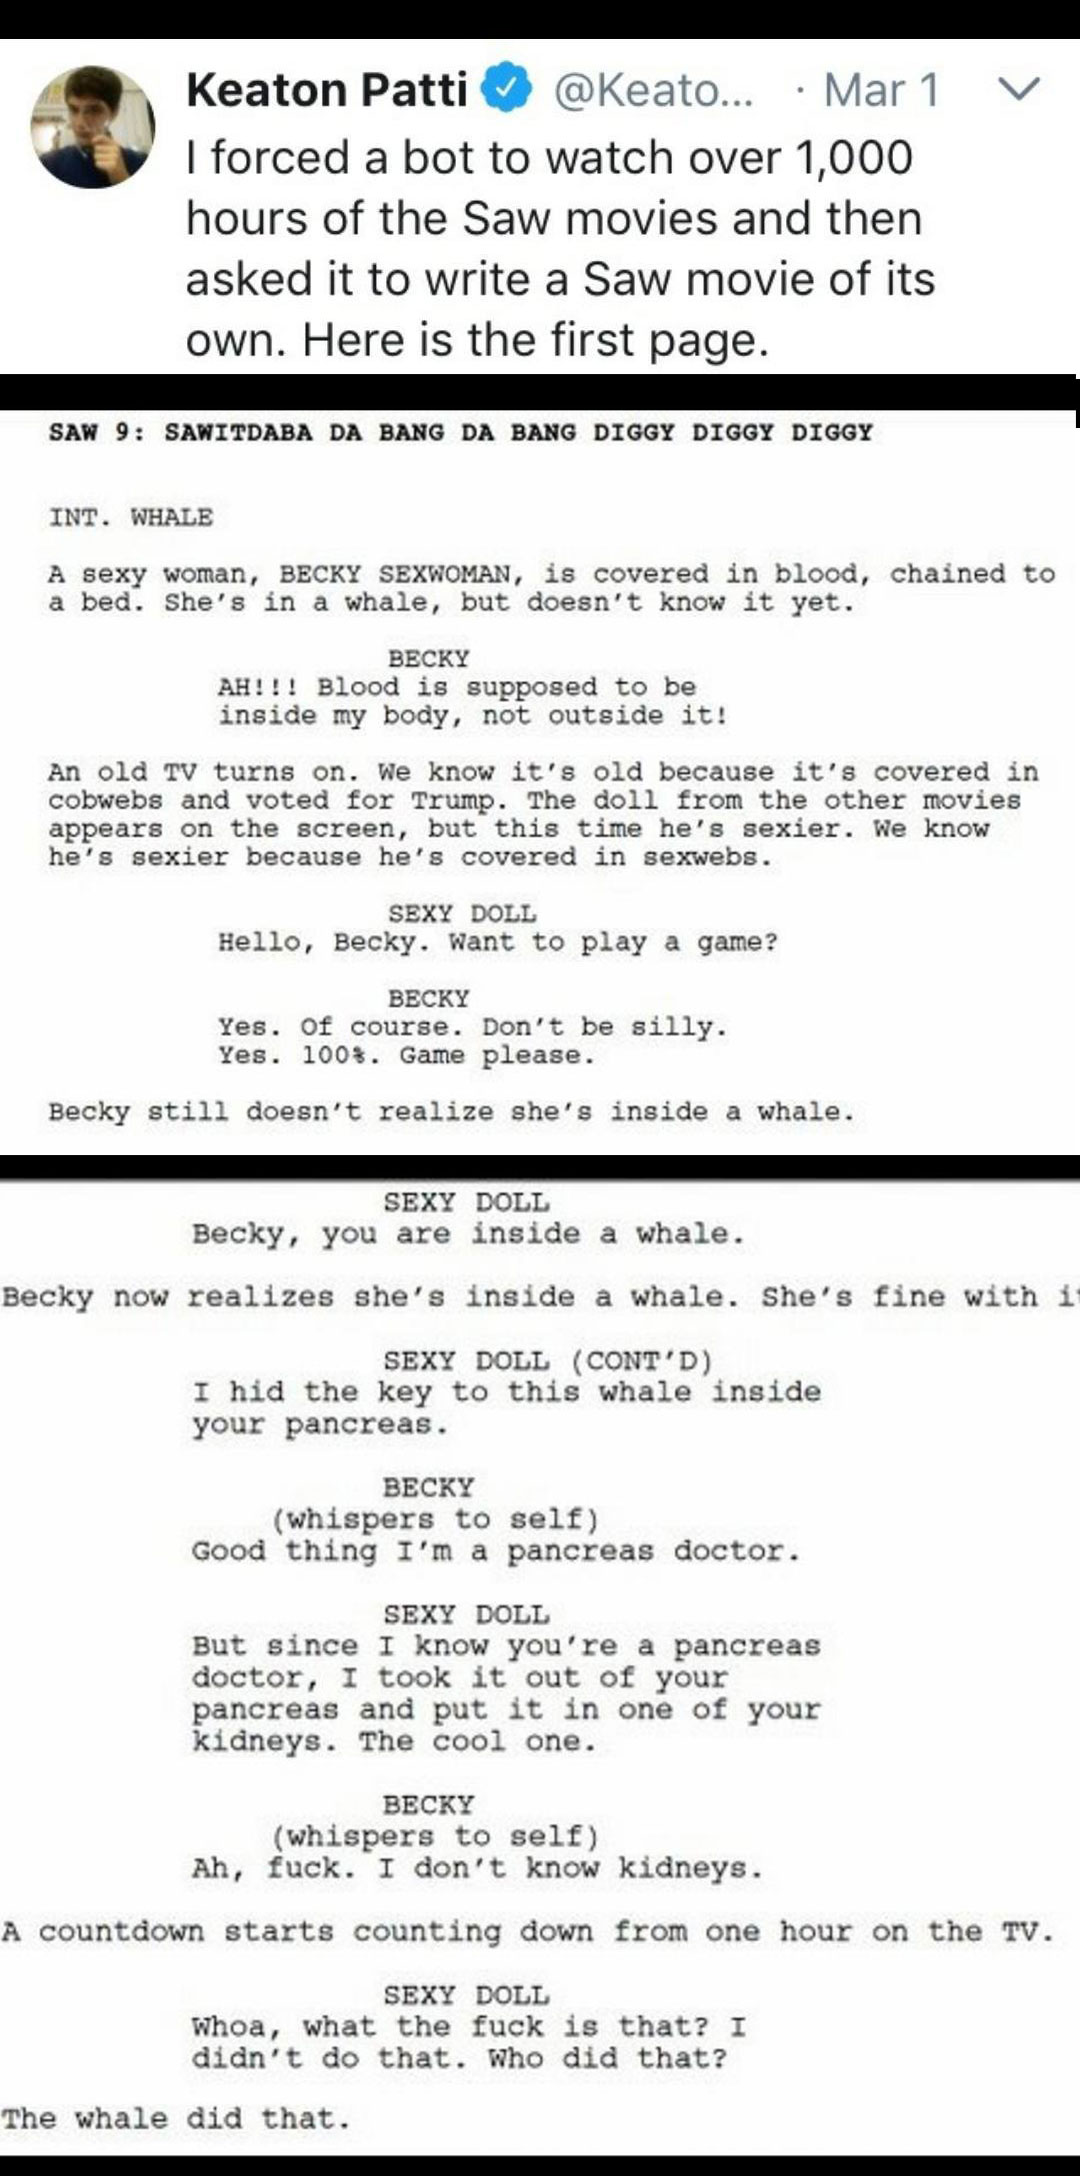 i forced a bot to watch over 1000 hours of the saw movies and then asked it to write a saw movie of its own, here is the first page